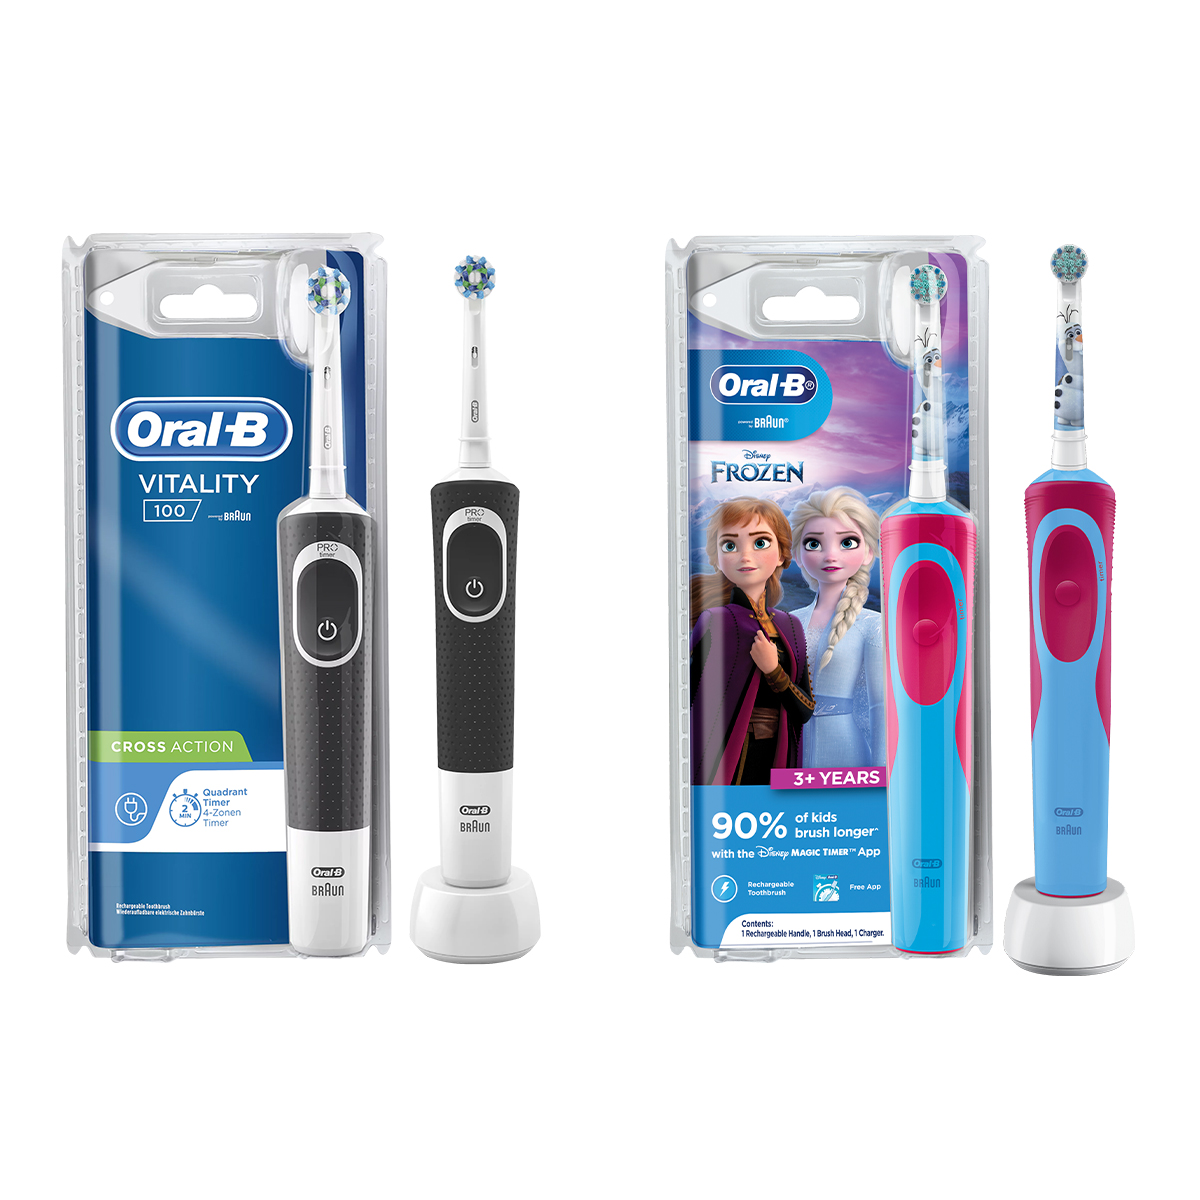 Oral B Vitality 100 Black Criss Cross Electric Rechargeable Toothbrush Powered by Braun and Oral B Kids Electric Rechargeable Toothbrush, Featuring Frozen Characters